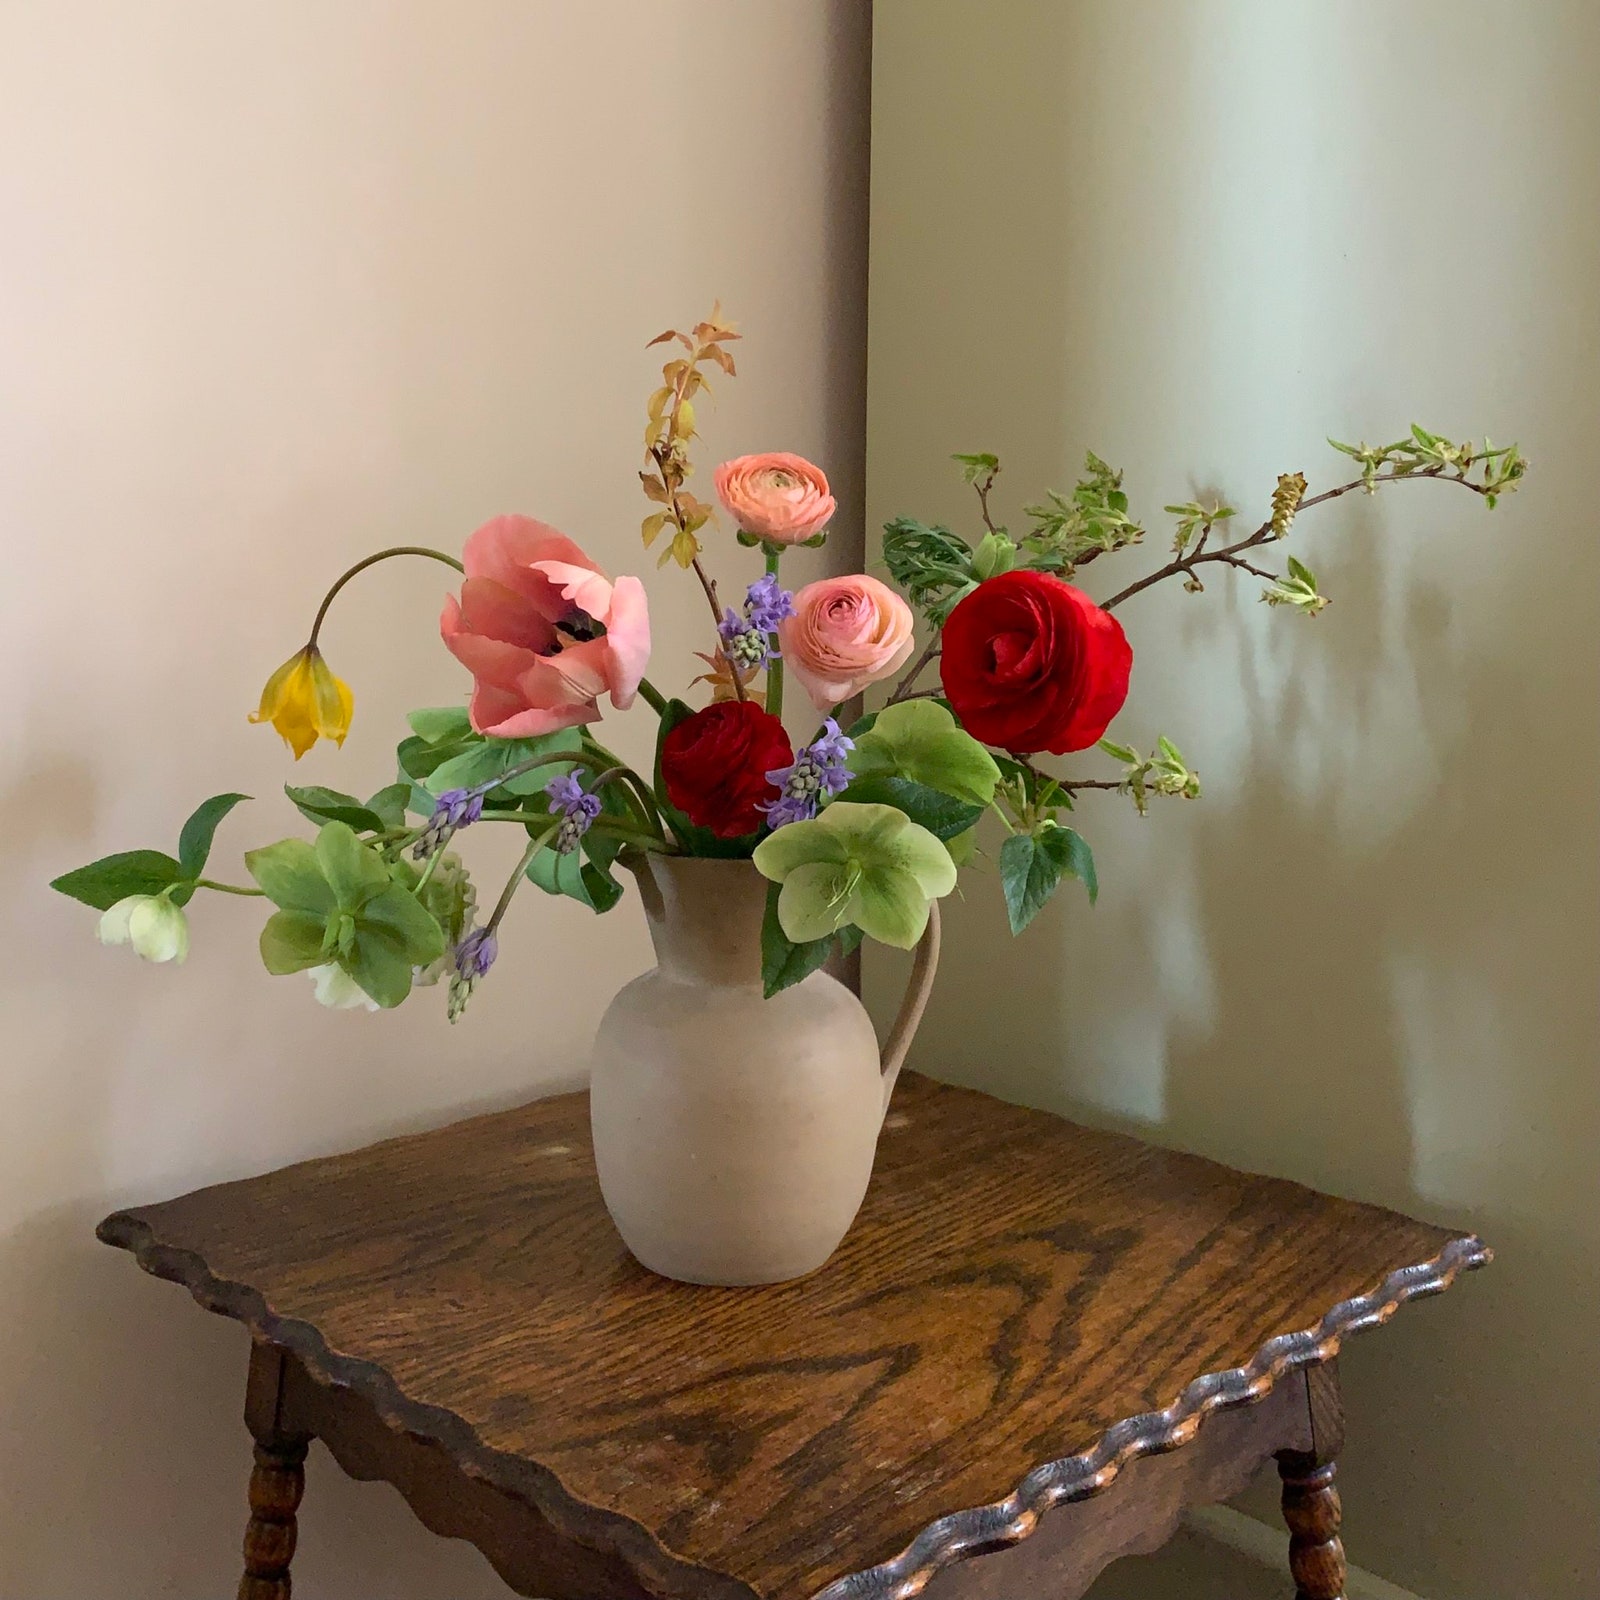 how to trim flowers for a vase